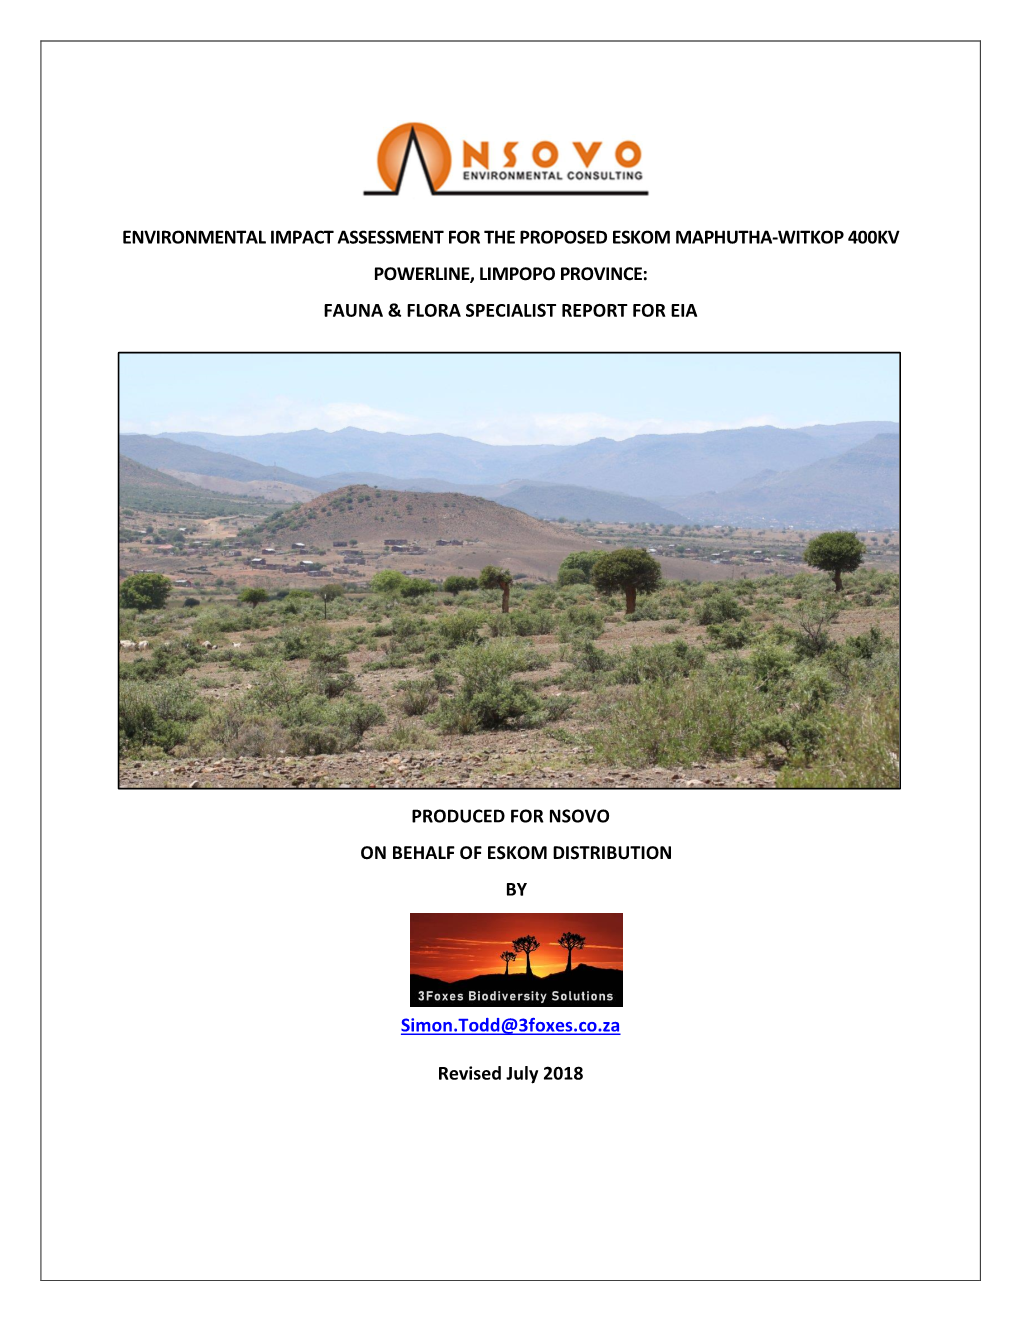 Environmental Impact Assessment for the Proposed Eskom Maphutha-Witkop 400Kv Powerline, Limpopo Province: Fauna & Flora Specialist Report for Eia